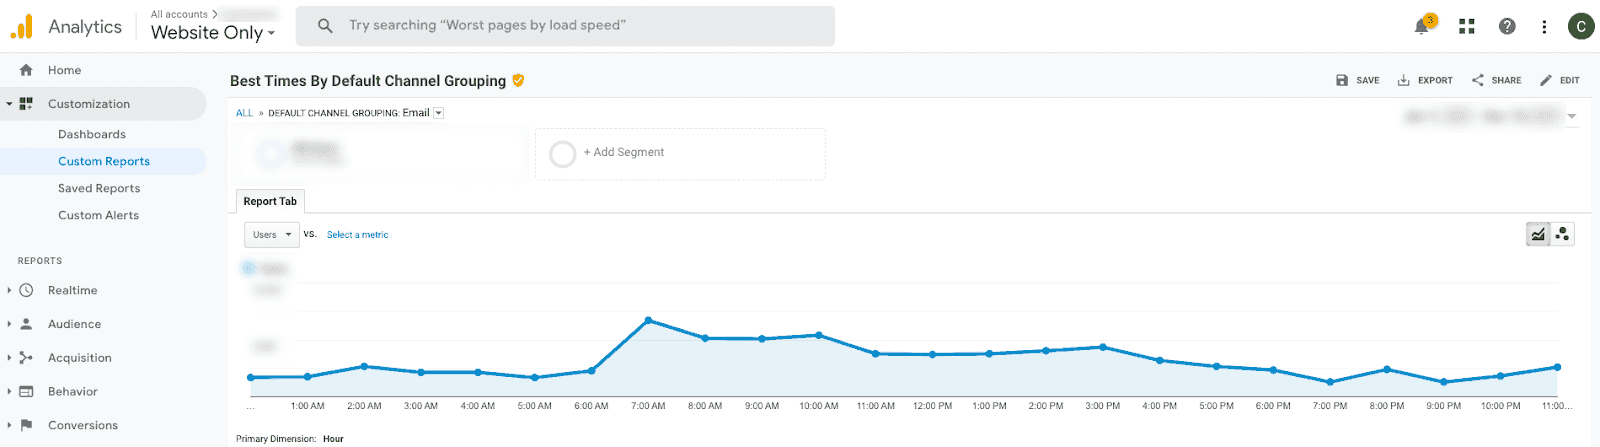 Google Analytics test by default channel grouping results graph 